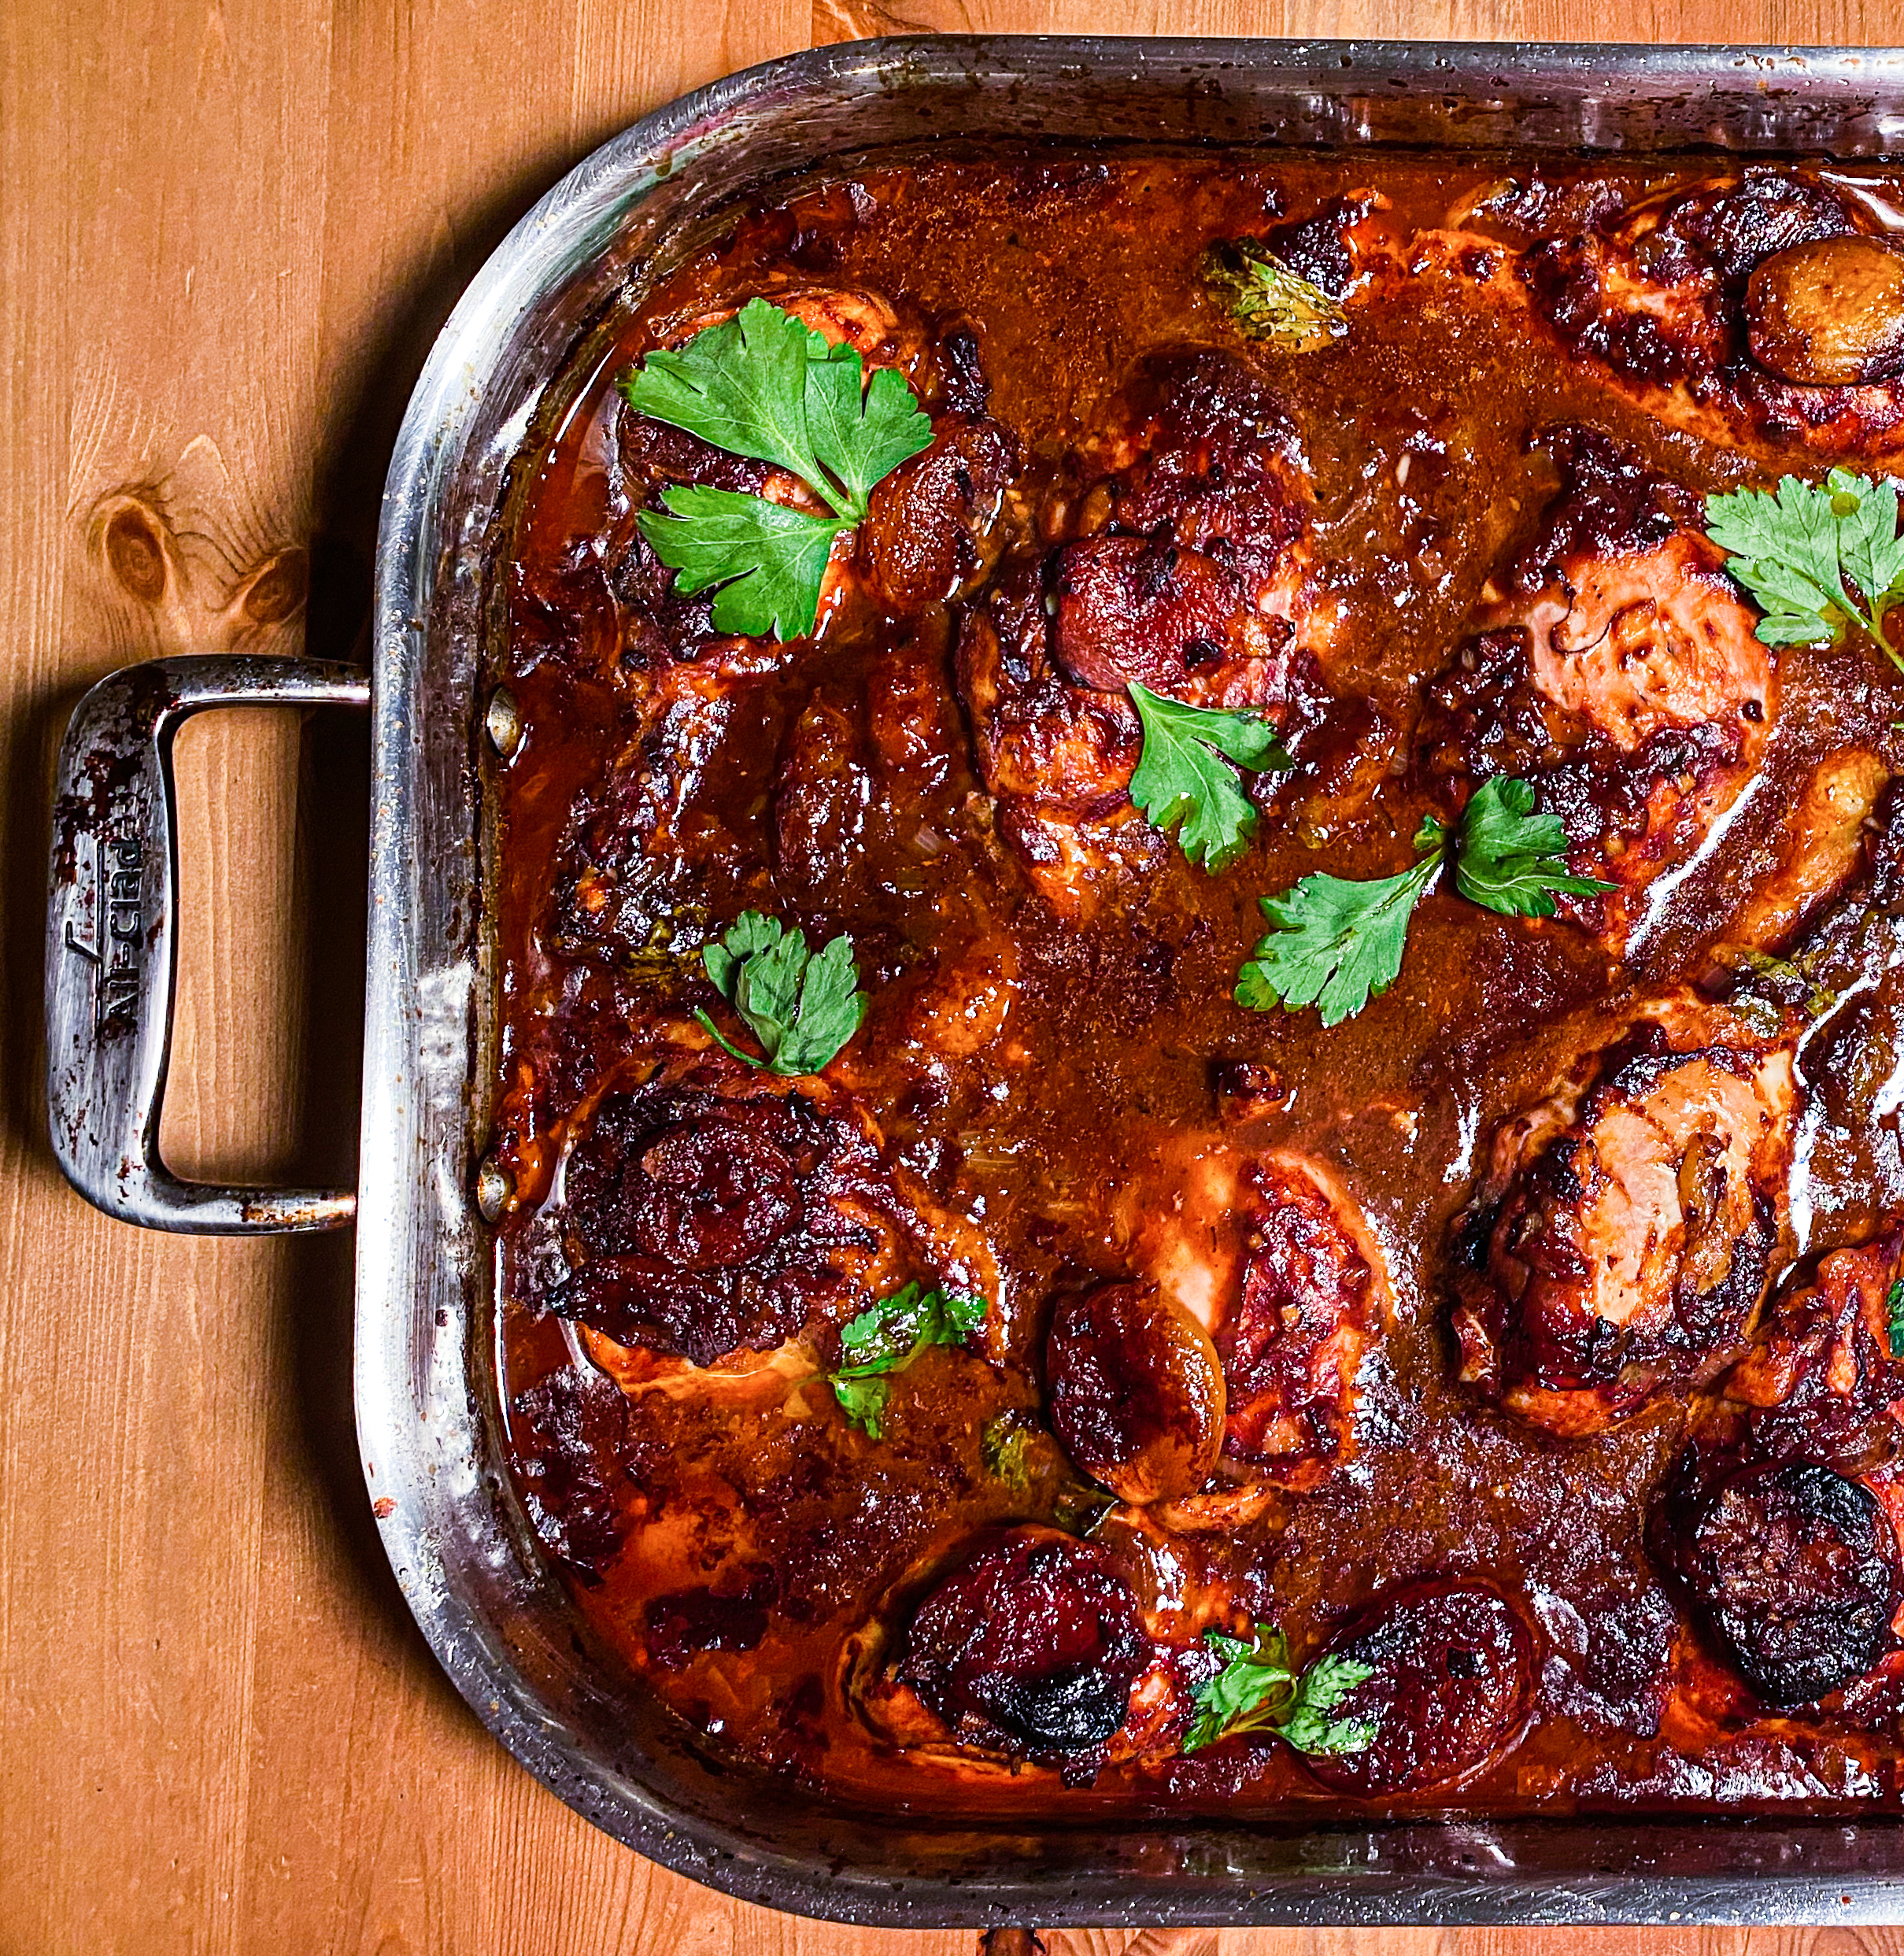 D'JAJ MISH MOSH: Syrian Sweet-and-Tart Chicken with Apricots,  Tomatoes, and Lemon